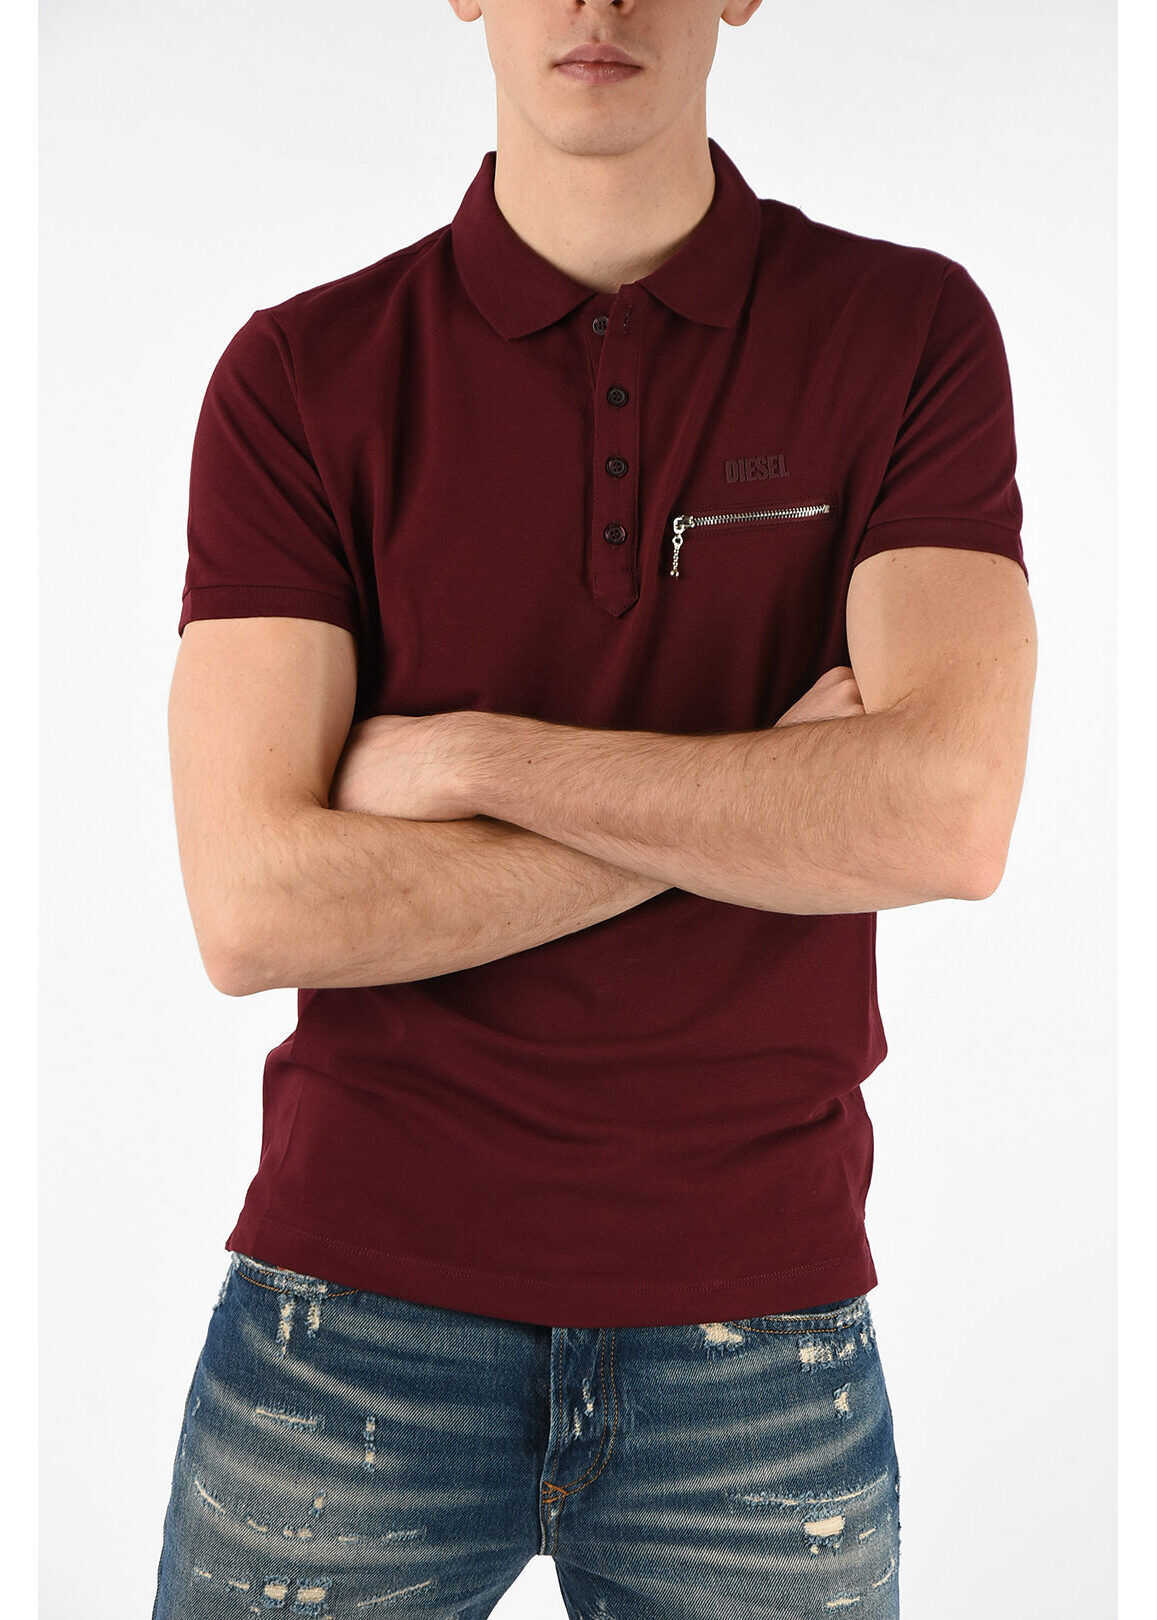 Diesel Polo T-KAL-3 with Breast Pocket BURGUNDY